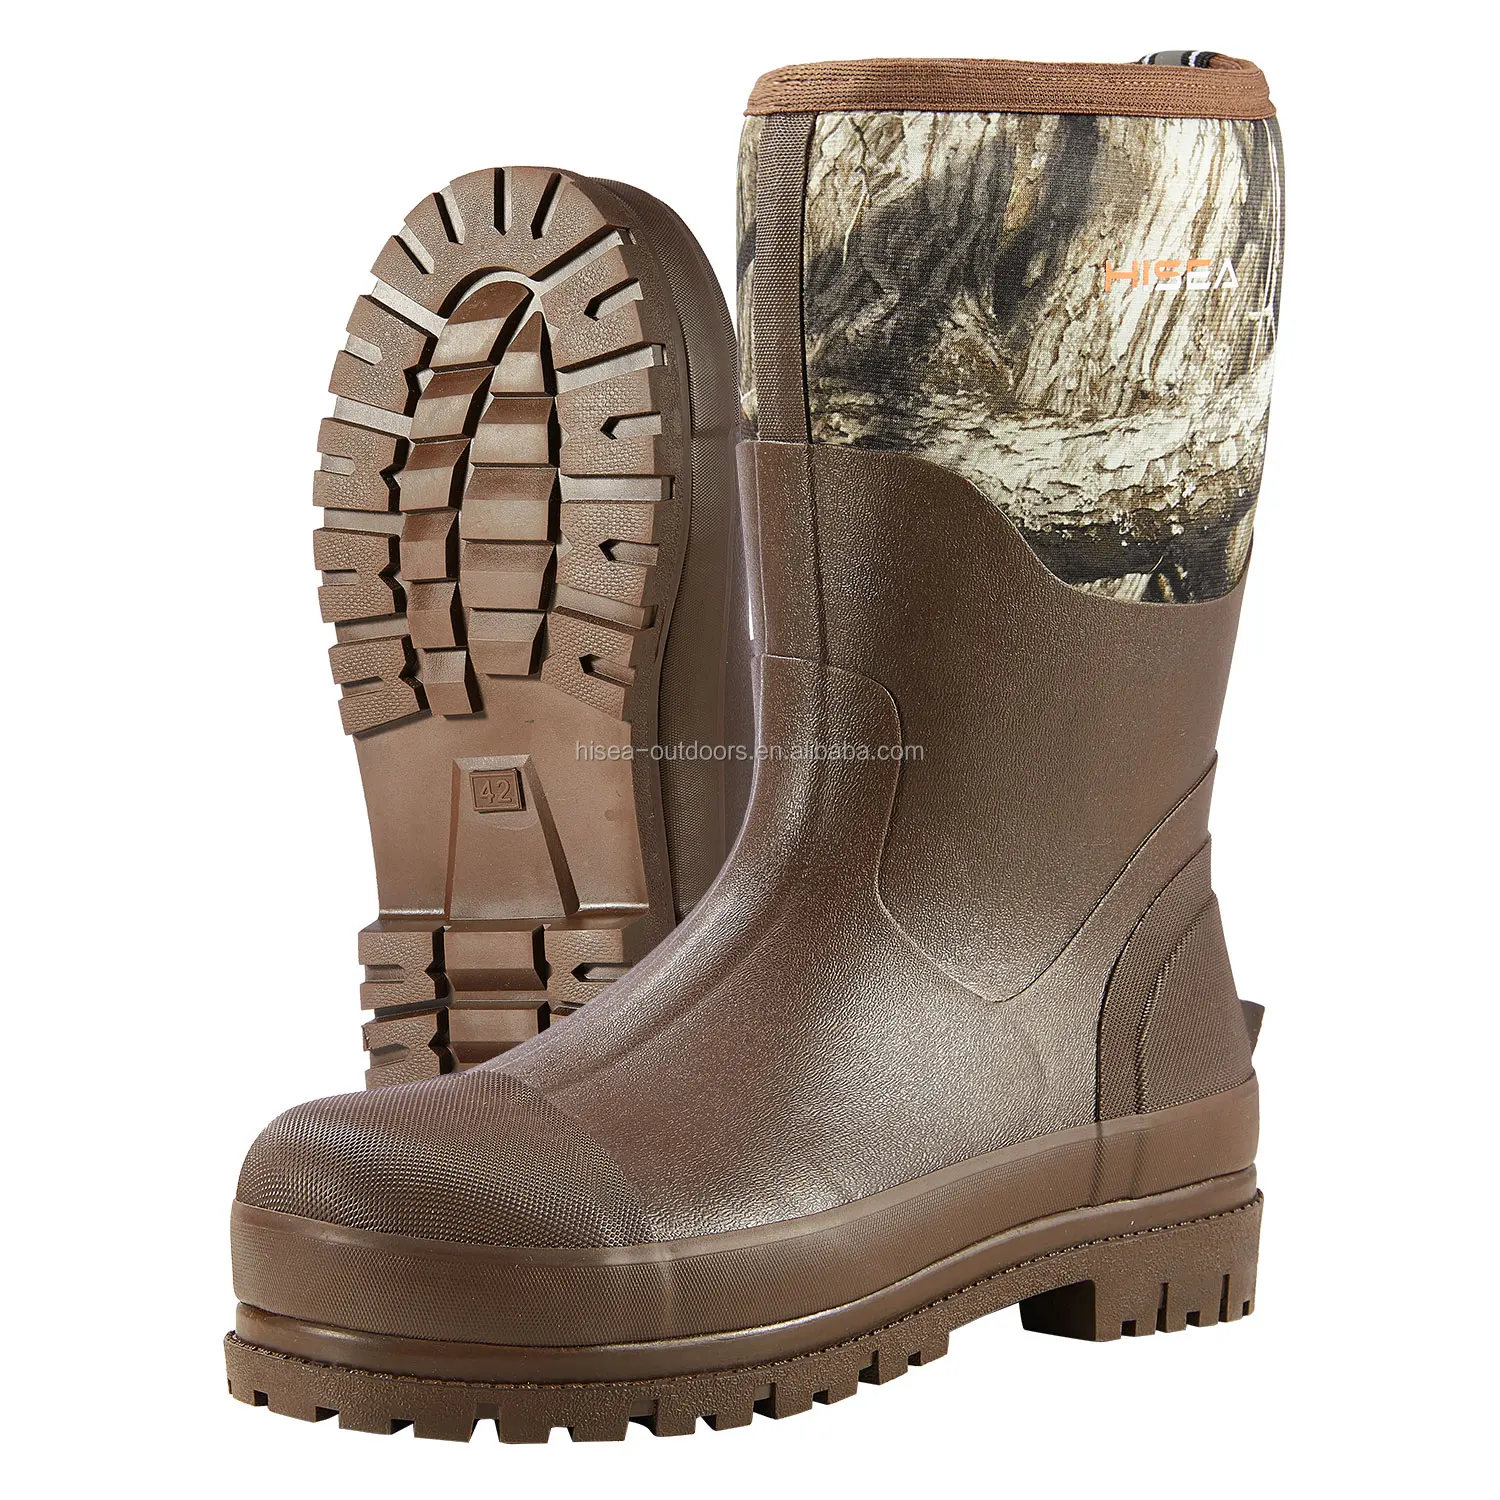 Buy > insulated muck boots men's > in stock